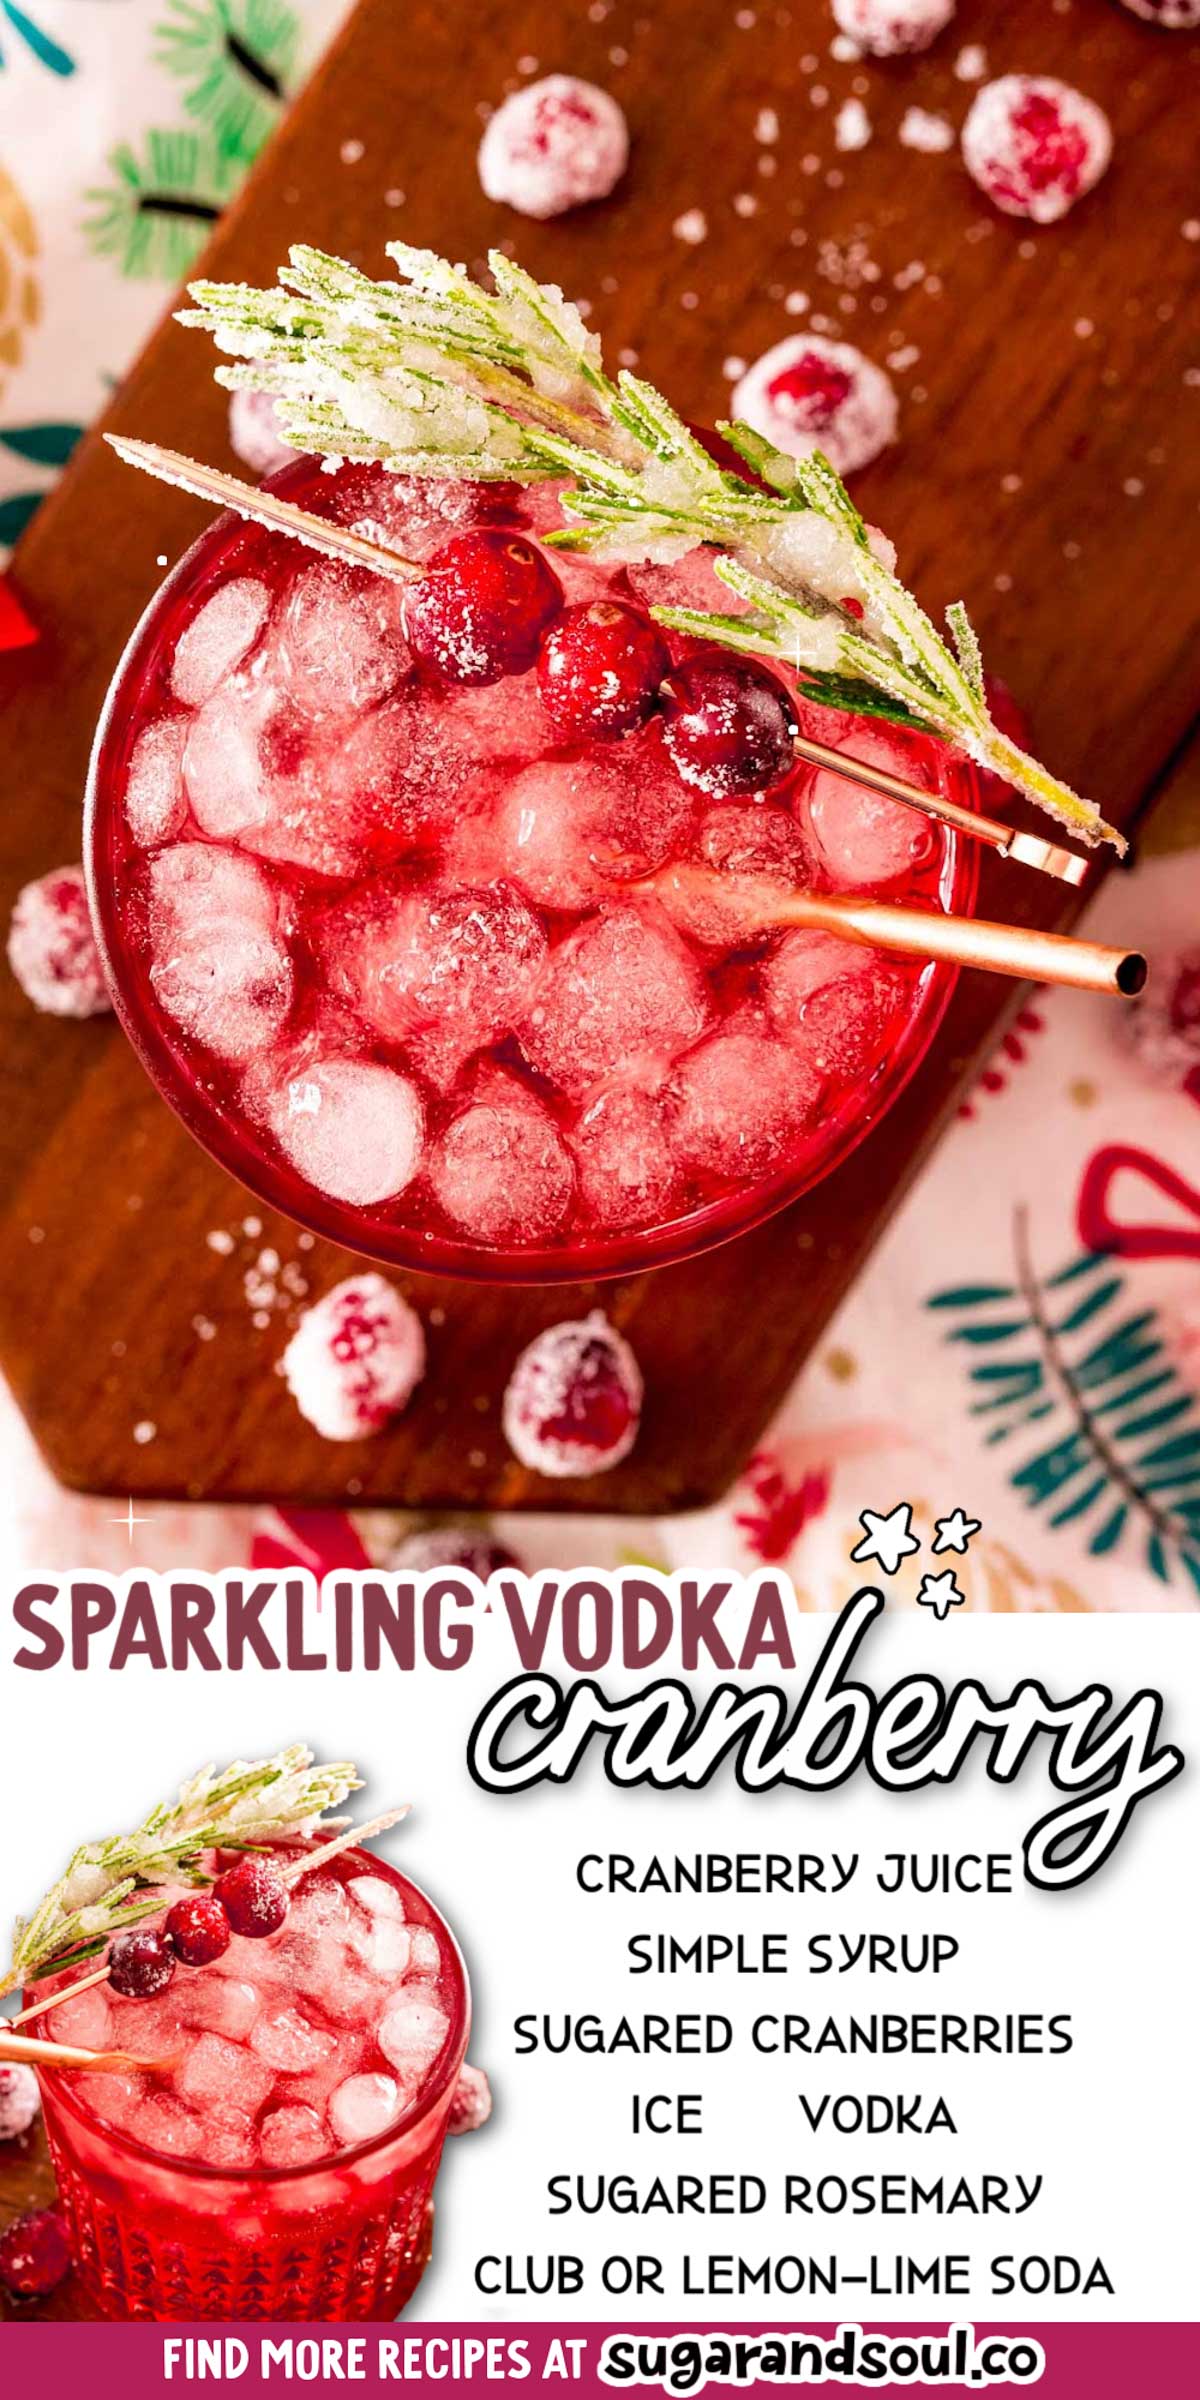 This Sparkling Vodka Cranberry is a quick 4 ingredient cocktail that's served over ice and garnished with sugared cranberries and rosemary! Ready to sip on in 10 minutes or less! via @sugarandsoulco